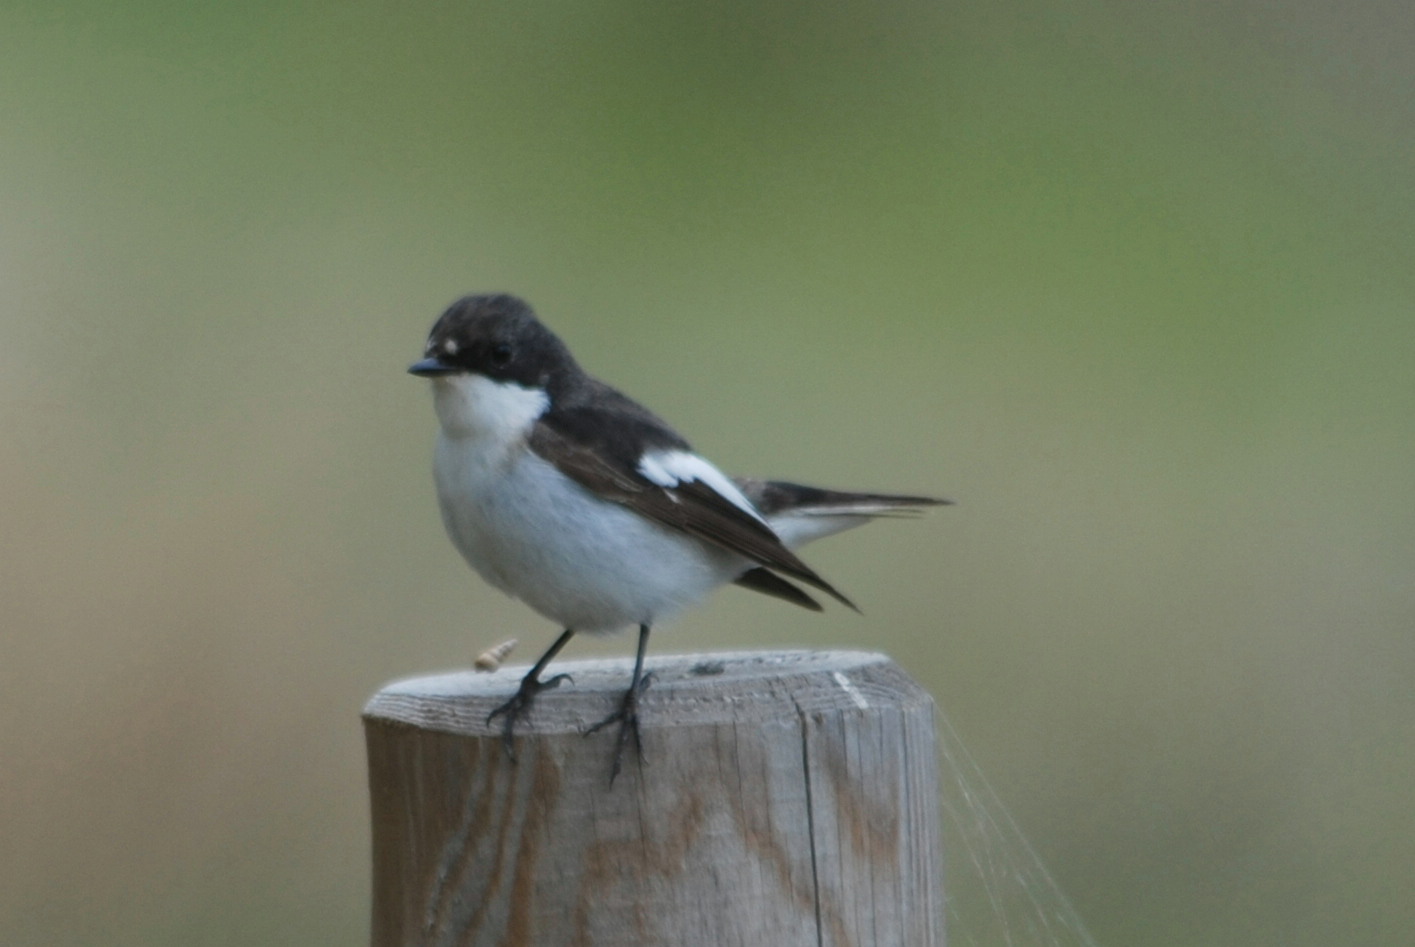 Click picture to see more PiedFlycatchers.